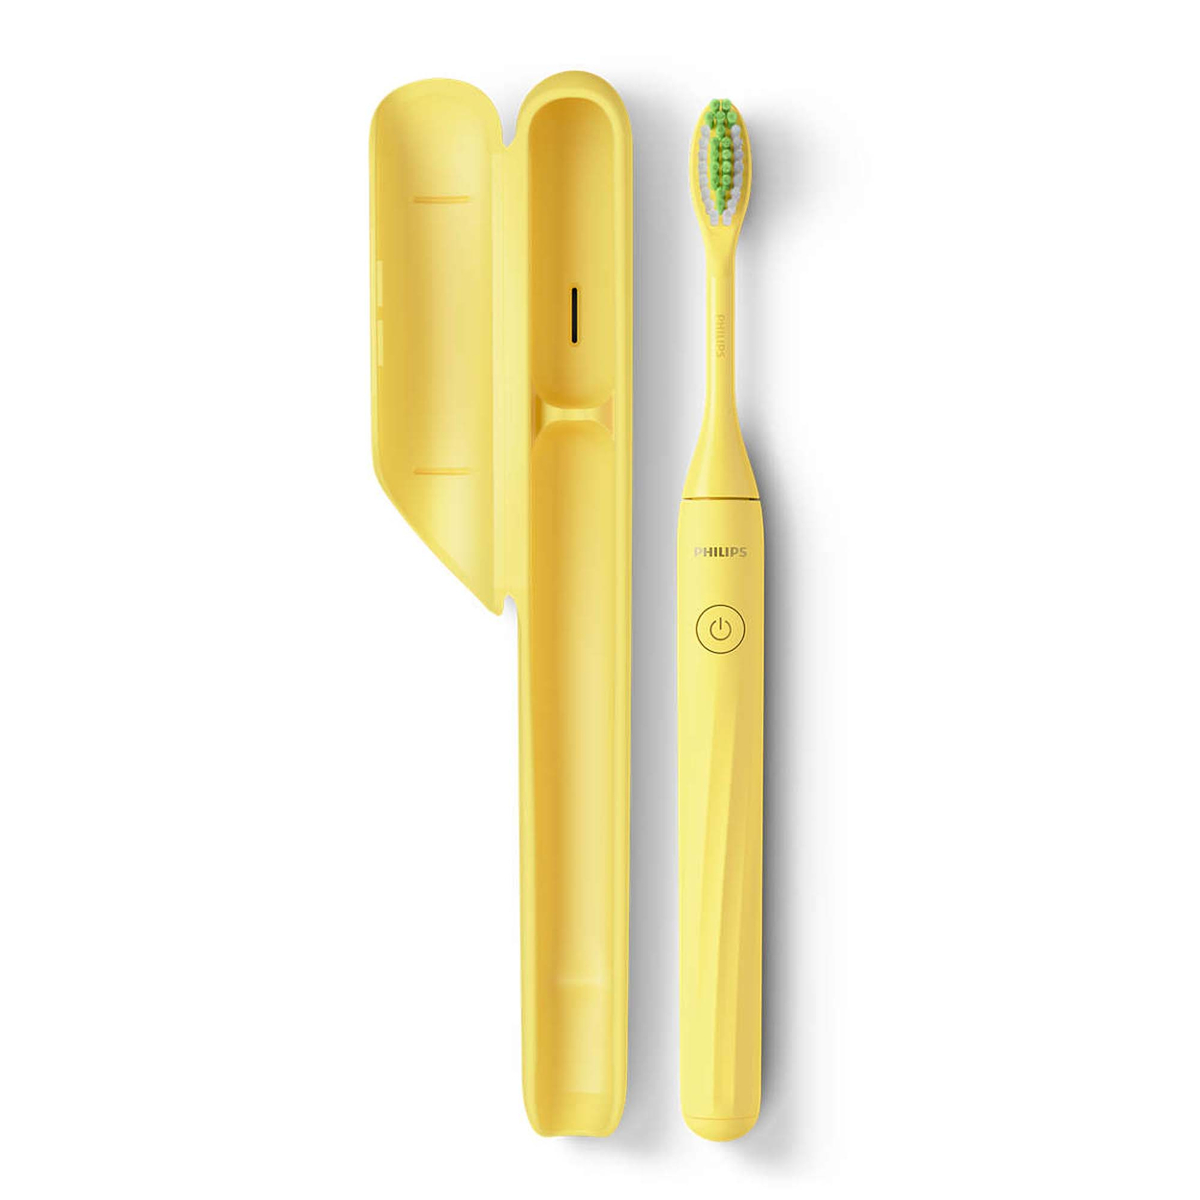 Philips One by Sonicare Battery Toothbrush Mango Yellow HY1100/02 + 2 Philips One by Sonicare Brush head Mango Yellow BH1022/02